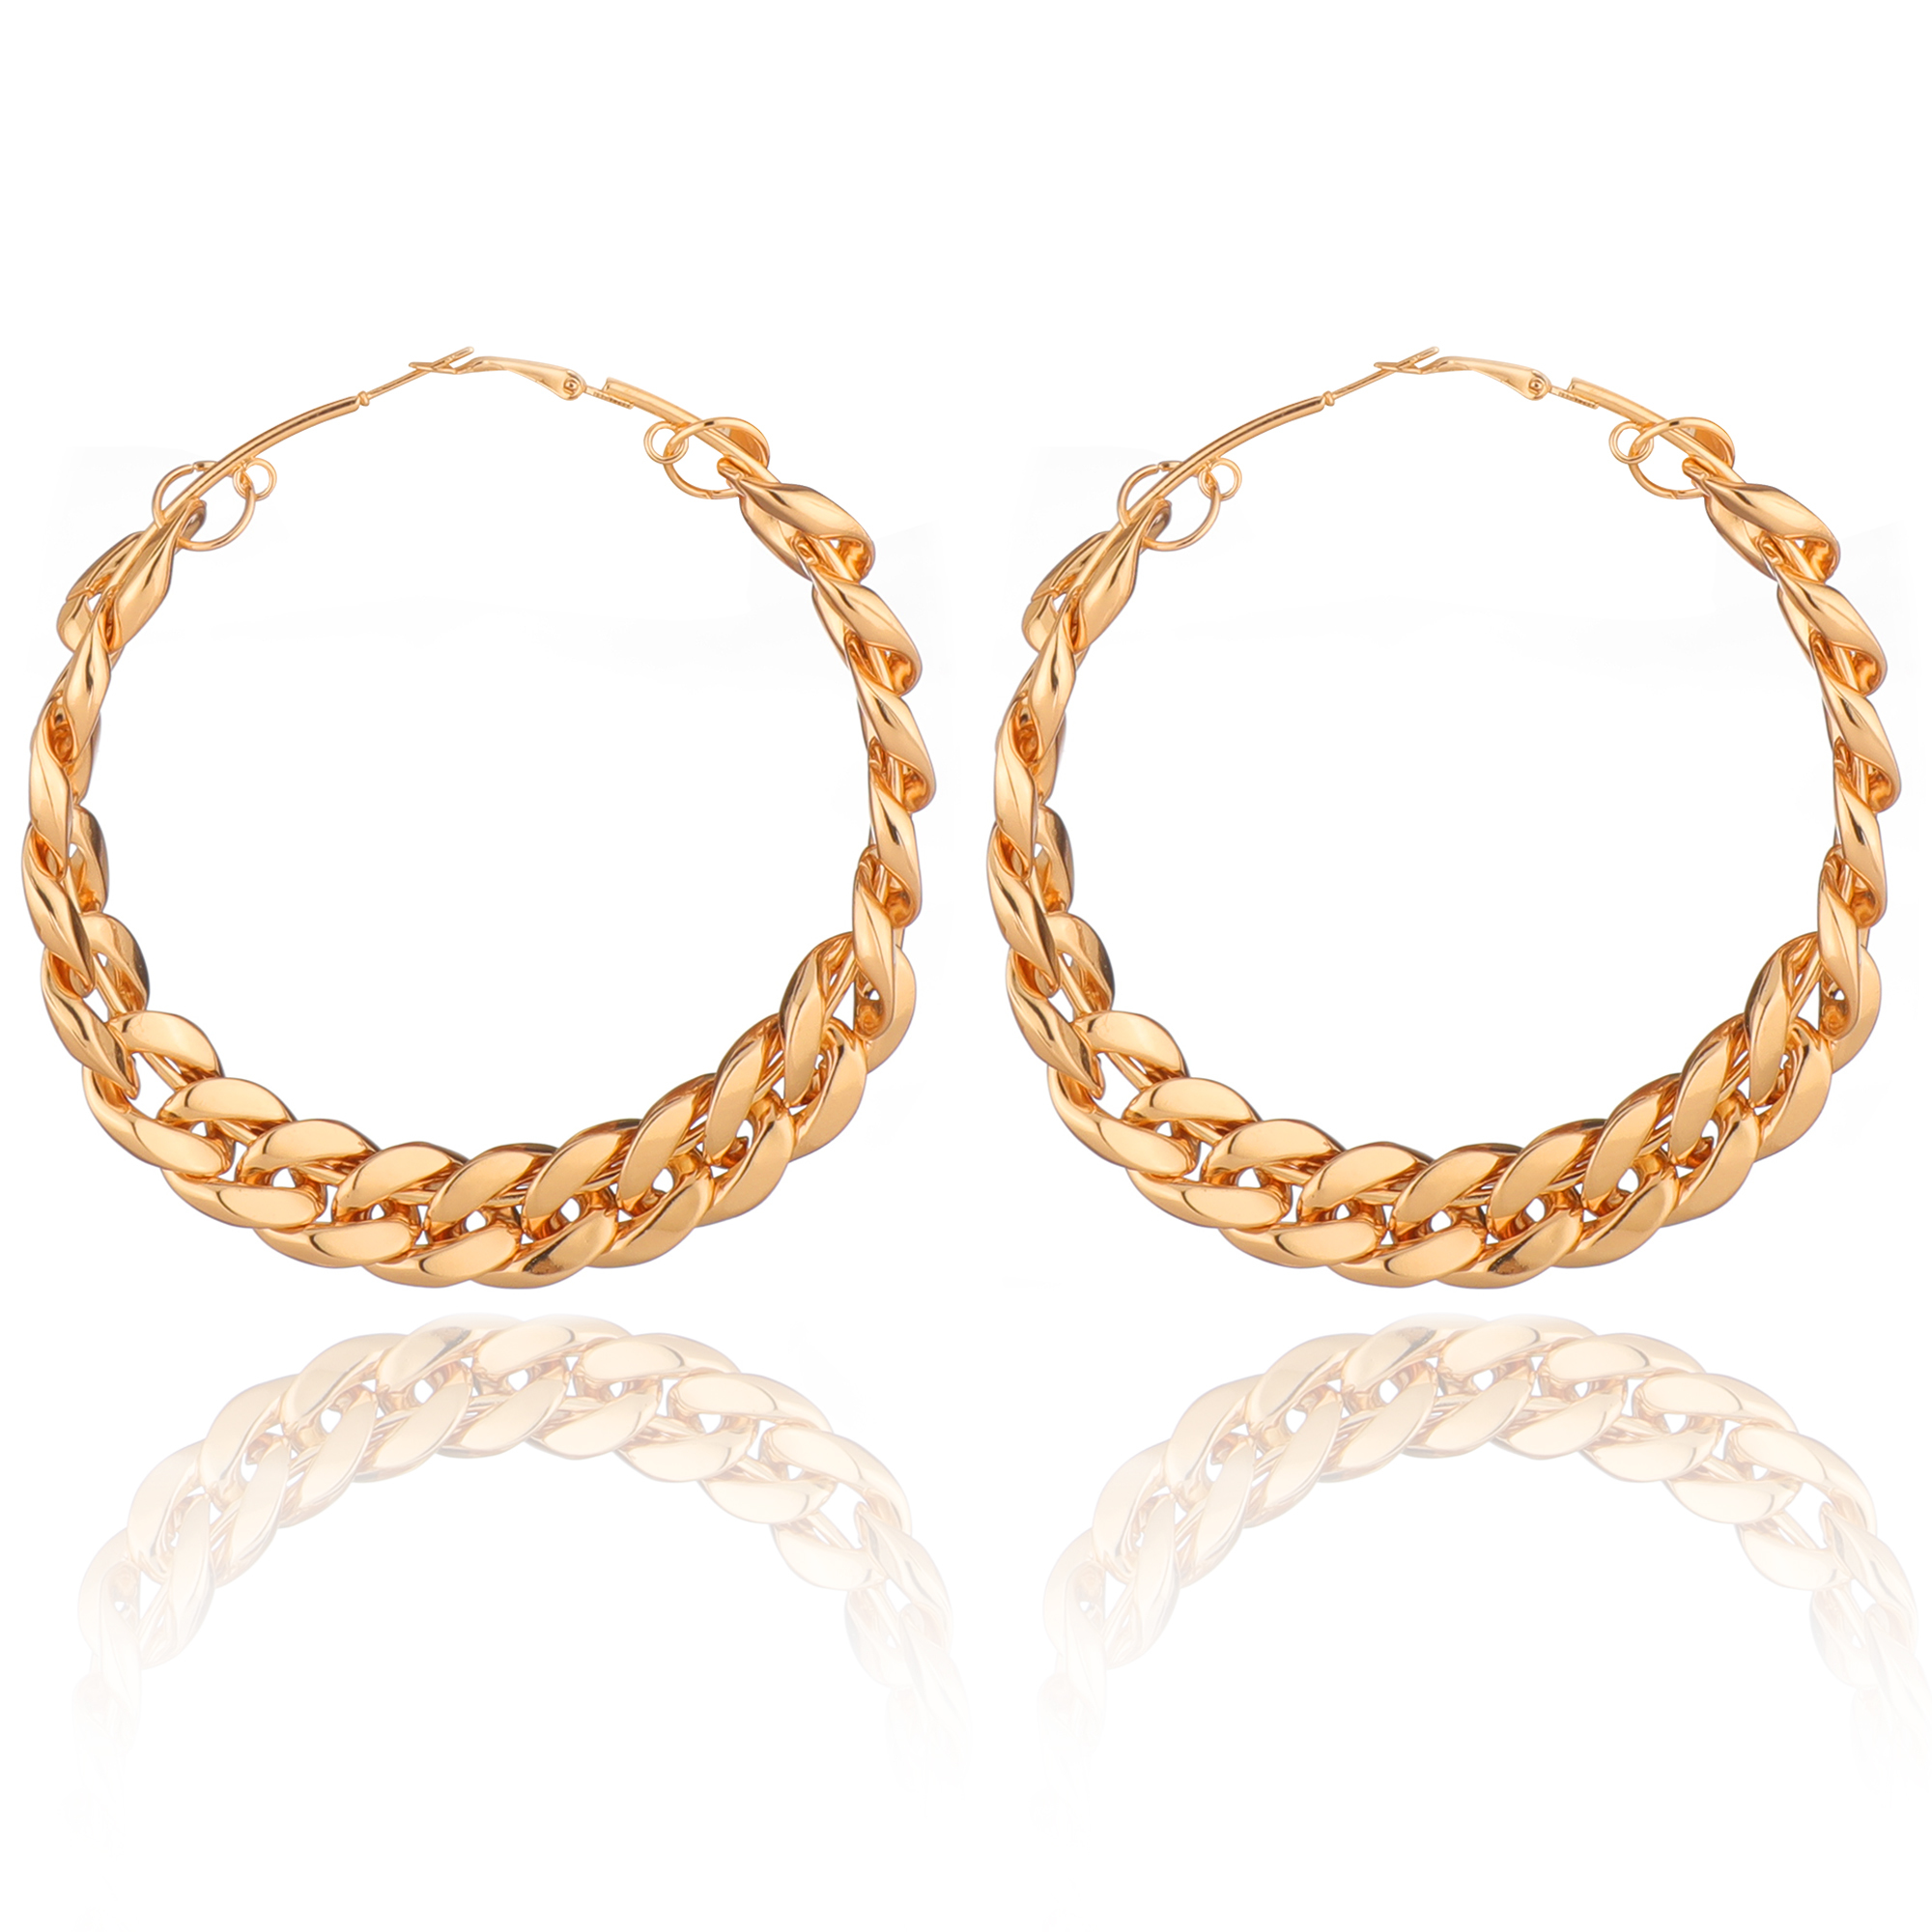 Twisted Golden Chain Hoop Statement Earrings For Women and Girls